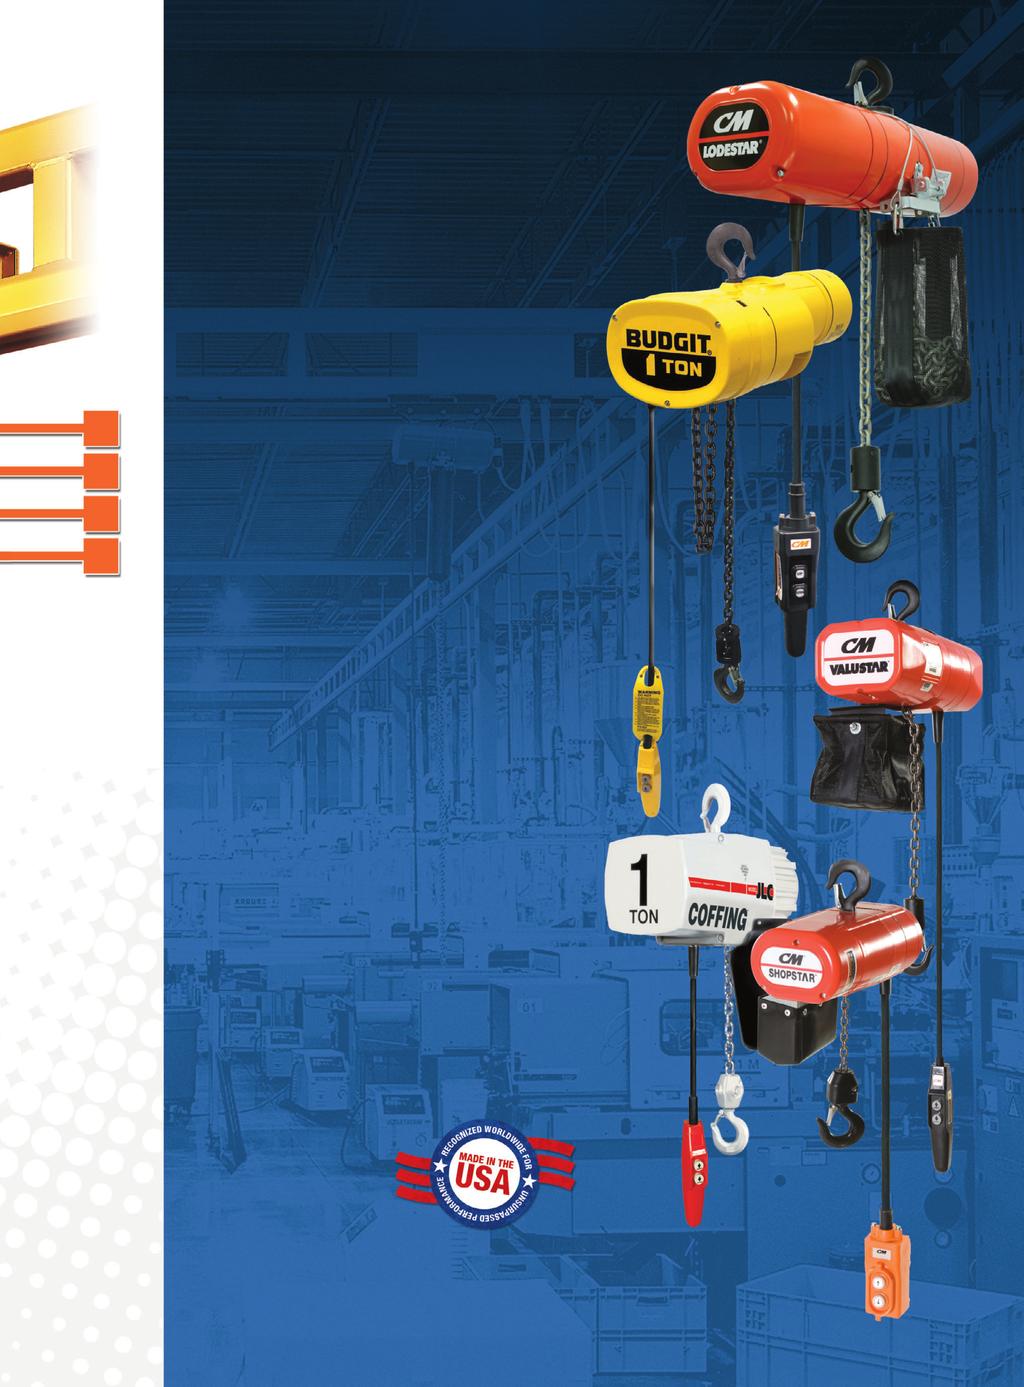 4 5 6 7 Complete your LodeRail System Complete your LodeRail System with a hoist from the broadest portfolio of manual and powered hoists in the industry.